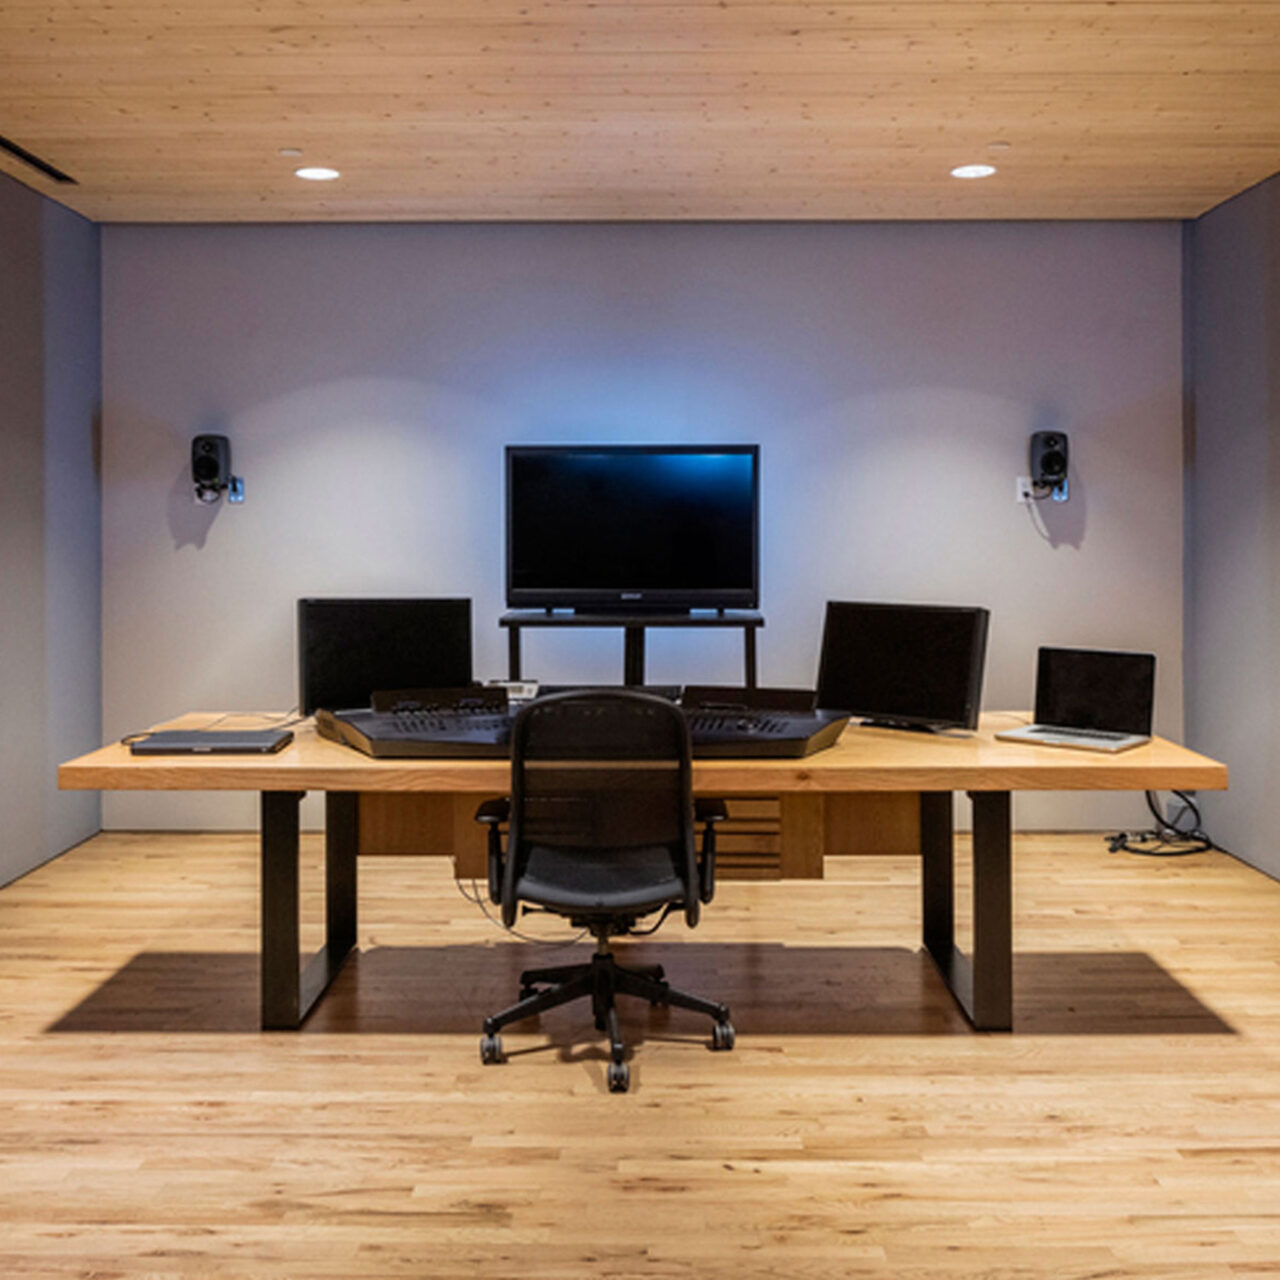 An office setup by SENTIENT Furniture featuring a custom wooden desk with ample surface area for multiple computers and audio equipment. The room has a professional ambiance with a neutral color palette and wooden ceiling.